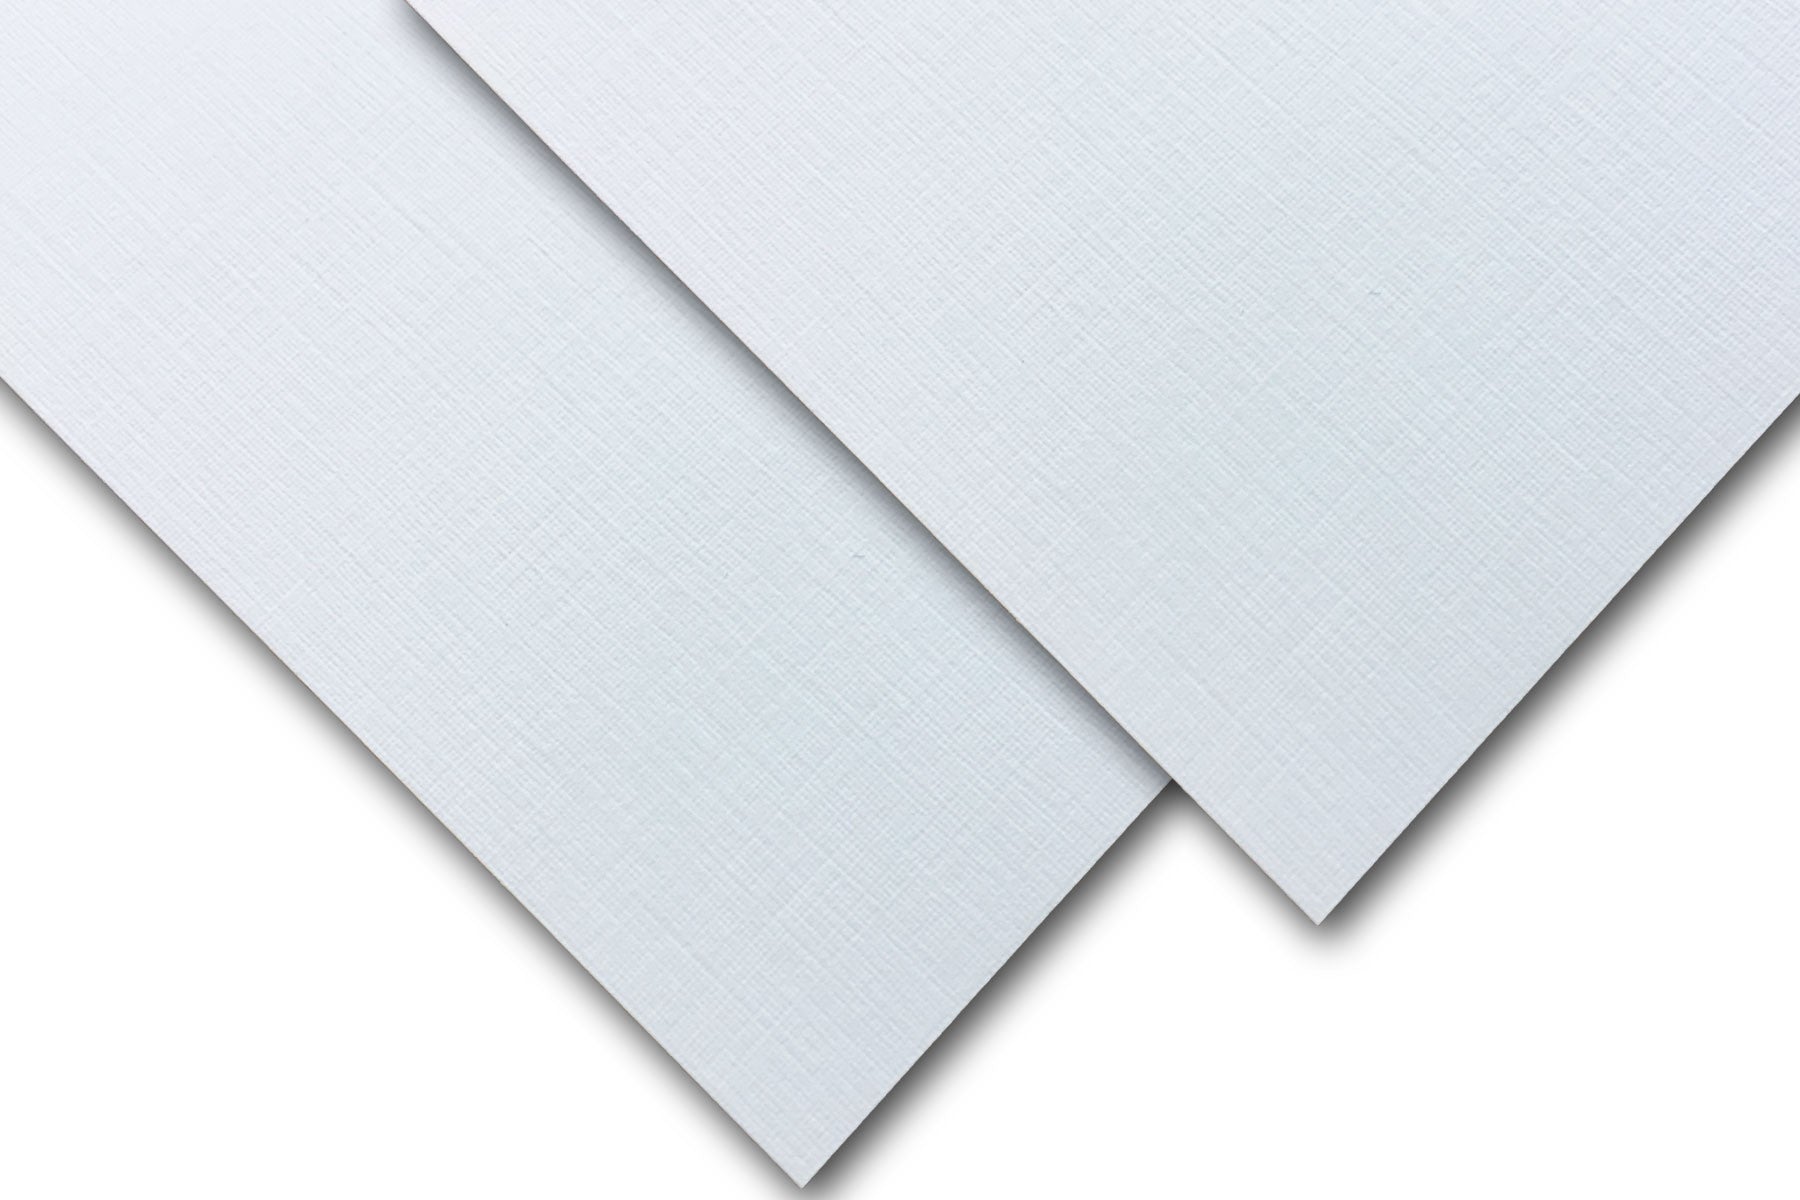 Classic Natural White Card Stock - 8 1/2 x 11 in 80 lb Cover Smooth